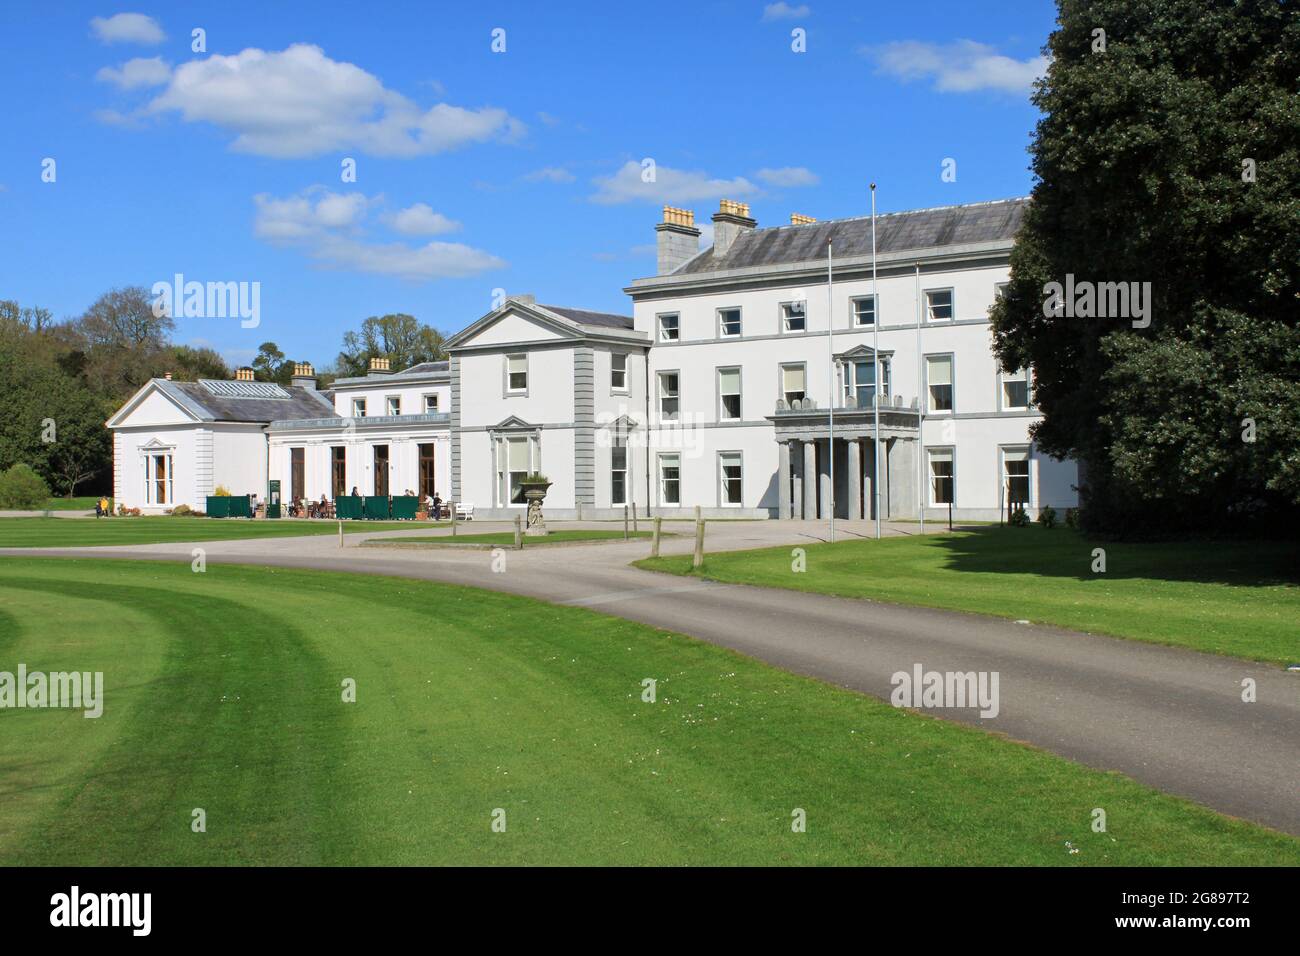 Fota House is a classical house built in the Regency style, in County Cork, Ireland Stock Photo